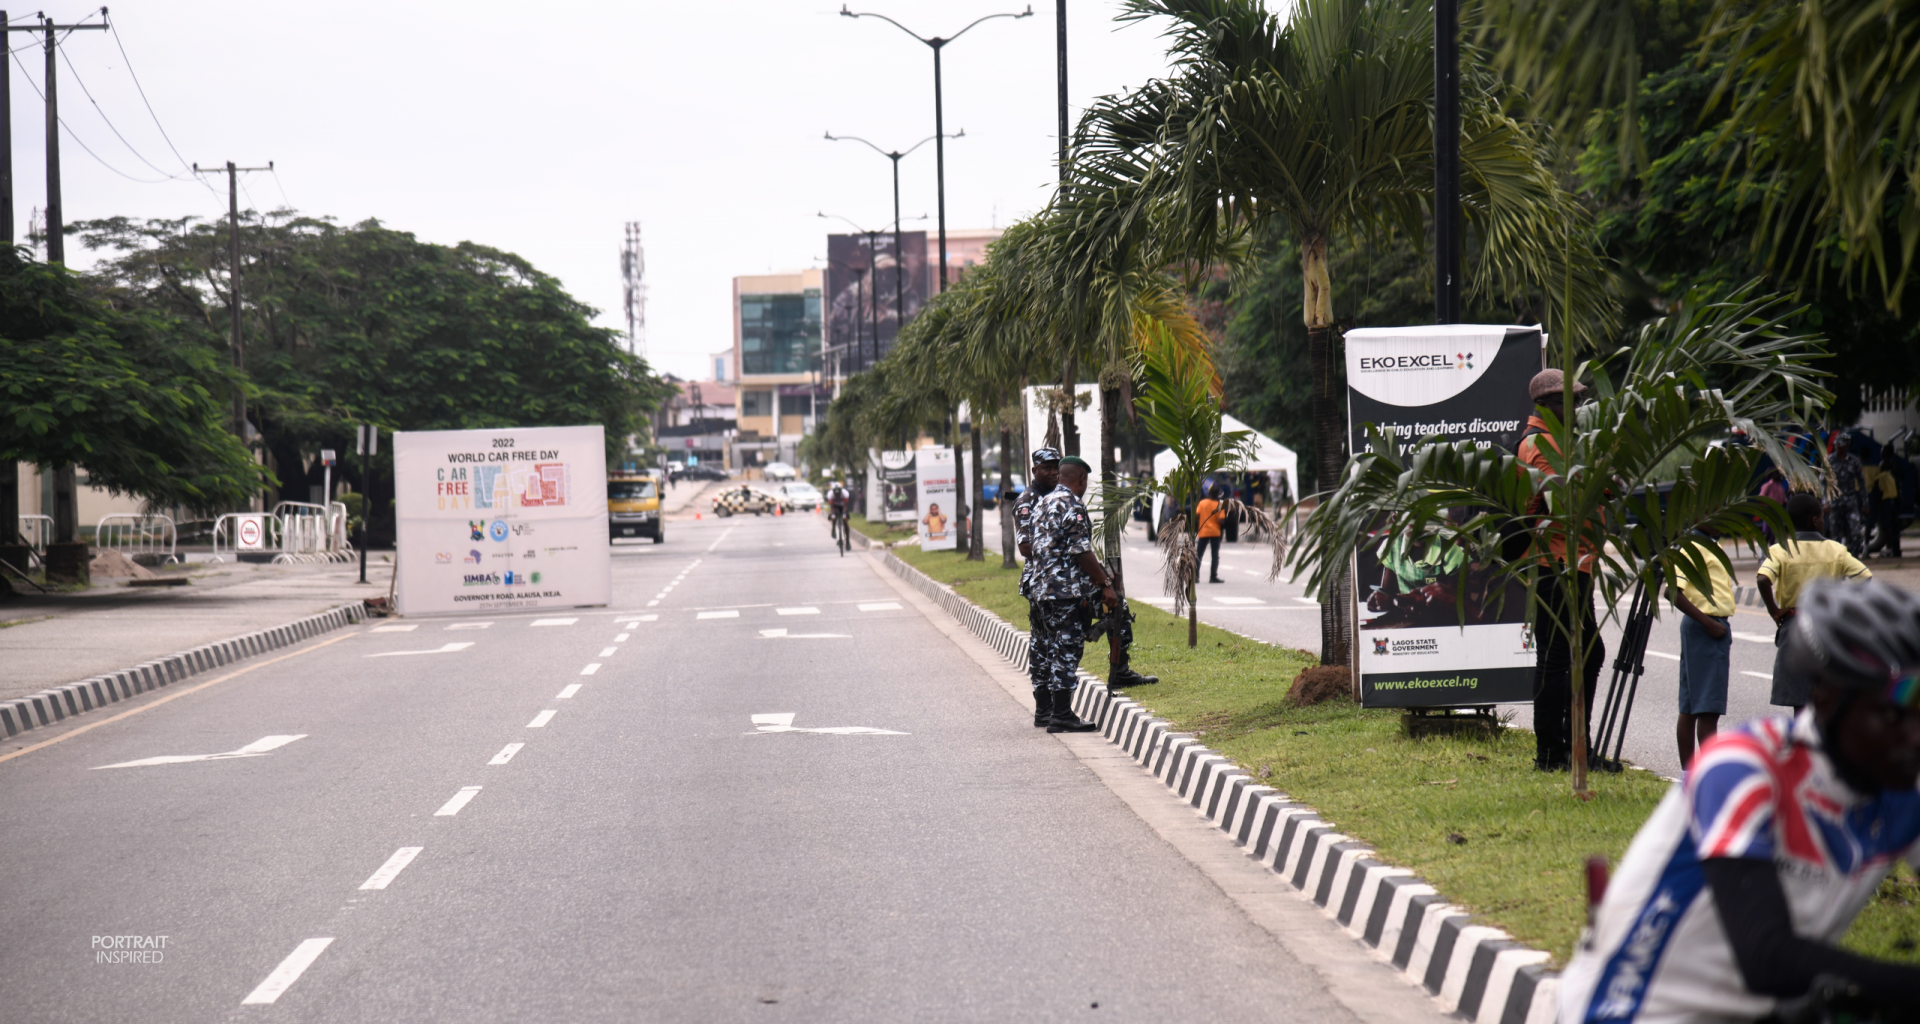 THE FIRST EVER WORLD CAR FREE DAY IN LAGOS